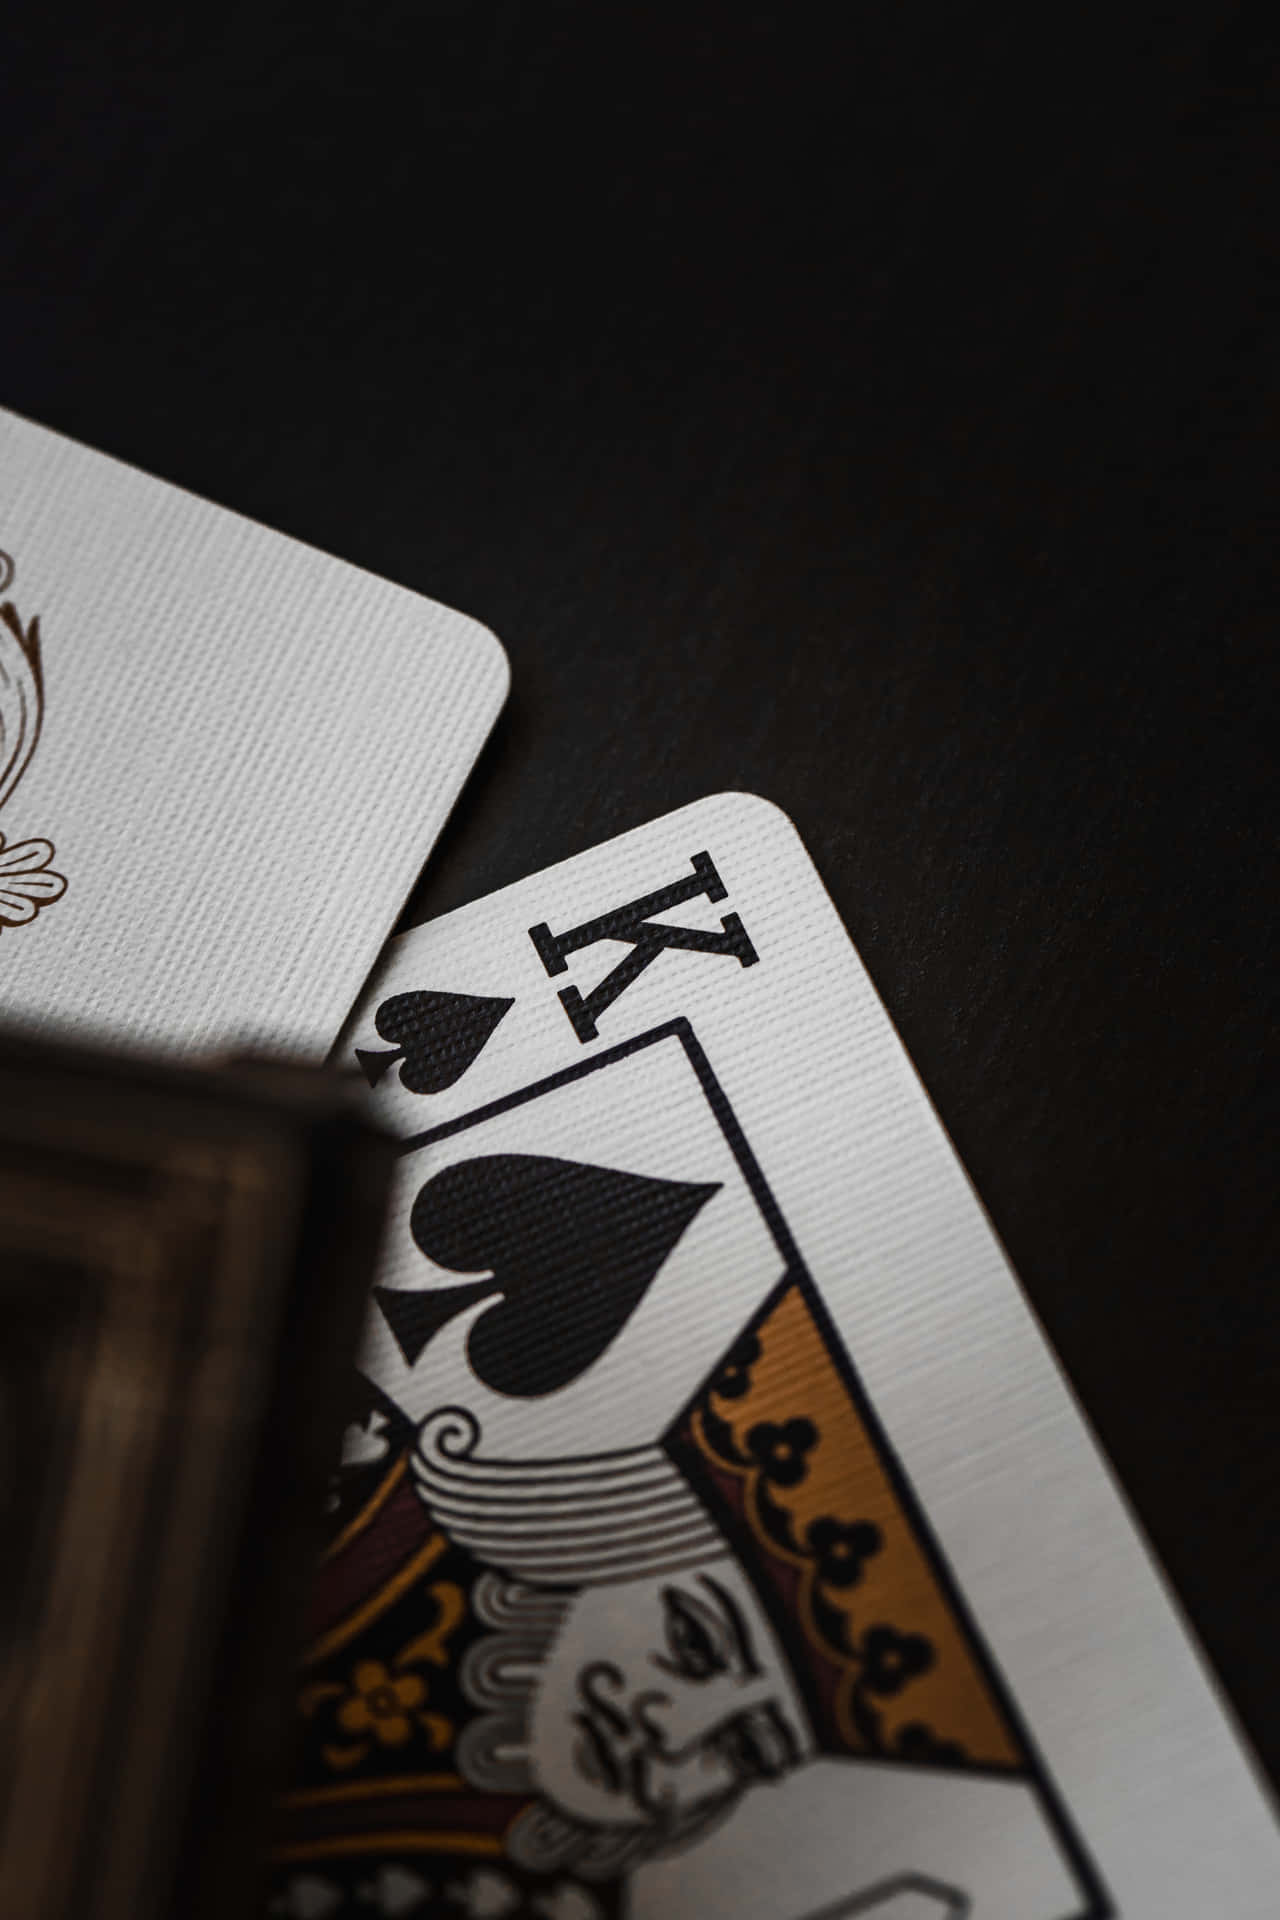 Playing Cards 3095 X 4643 Background